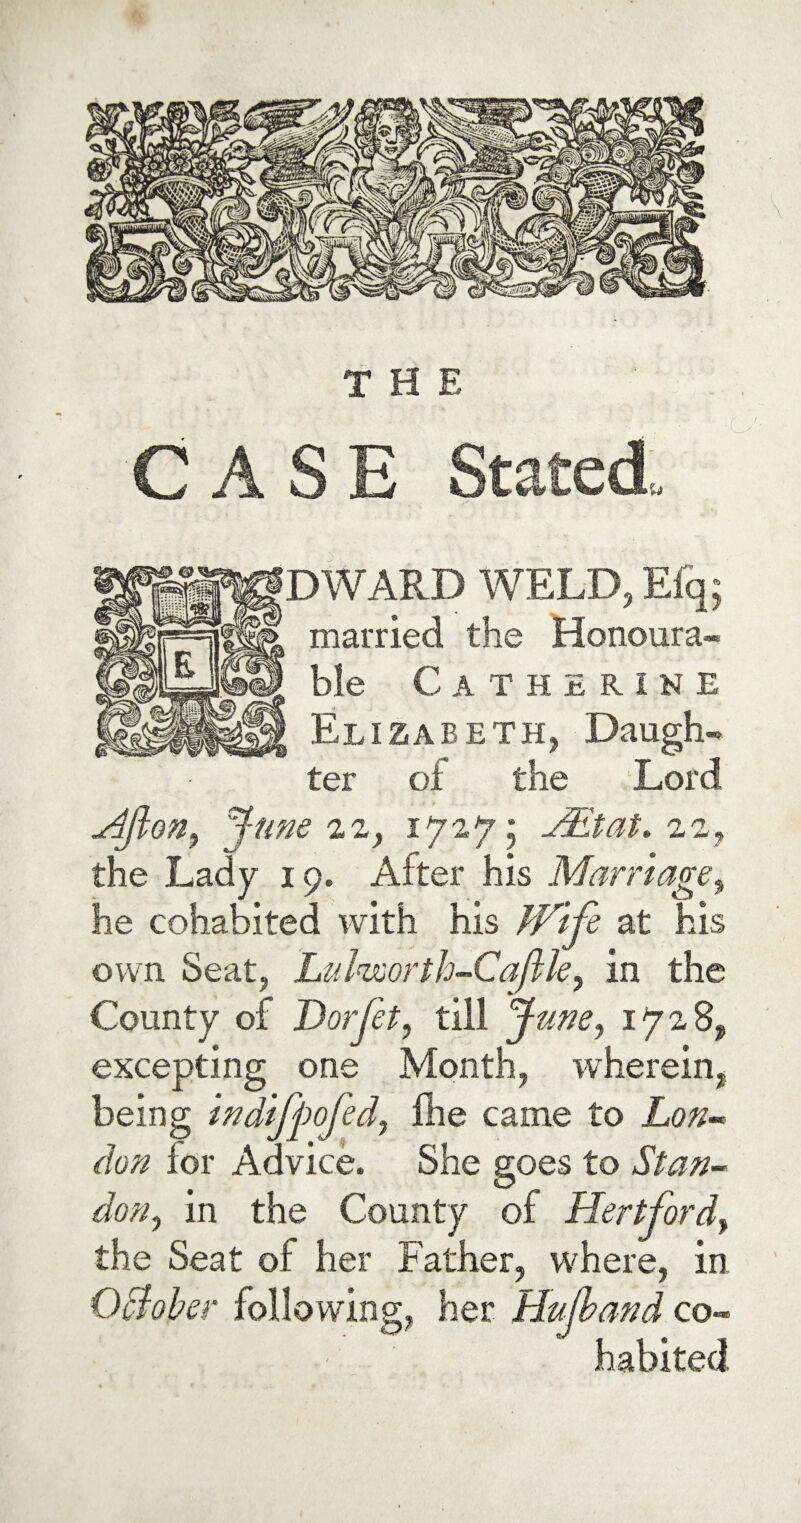 THE CASE Stated, DWARD WELD, E% married the Honoura¬ ble Catherine Elizabeth, Daugh¬ ter of the Lord Aft on, June 22, 1727; JEtat. 22, the Lady 19. After his Marriage, he cohabited with his Wife at his own Seat, Lul'isoorth-Caflle, in the County of Dor Jet, till June, 1728, excepting one Month, wherein, being indifpofed, Hie came to don for Advice. She goes to Stan- don, in the County of Hertford, the Seat of her Father, where, in October following, her Hujband co¬ habited